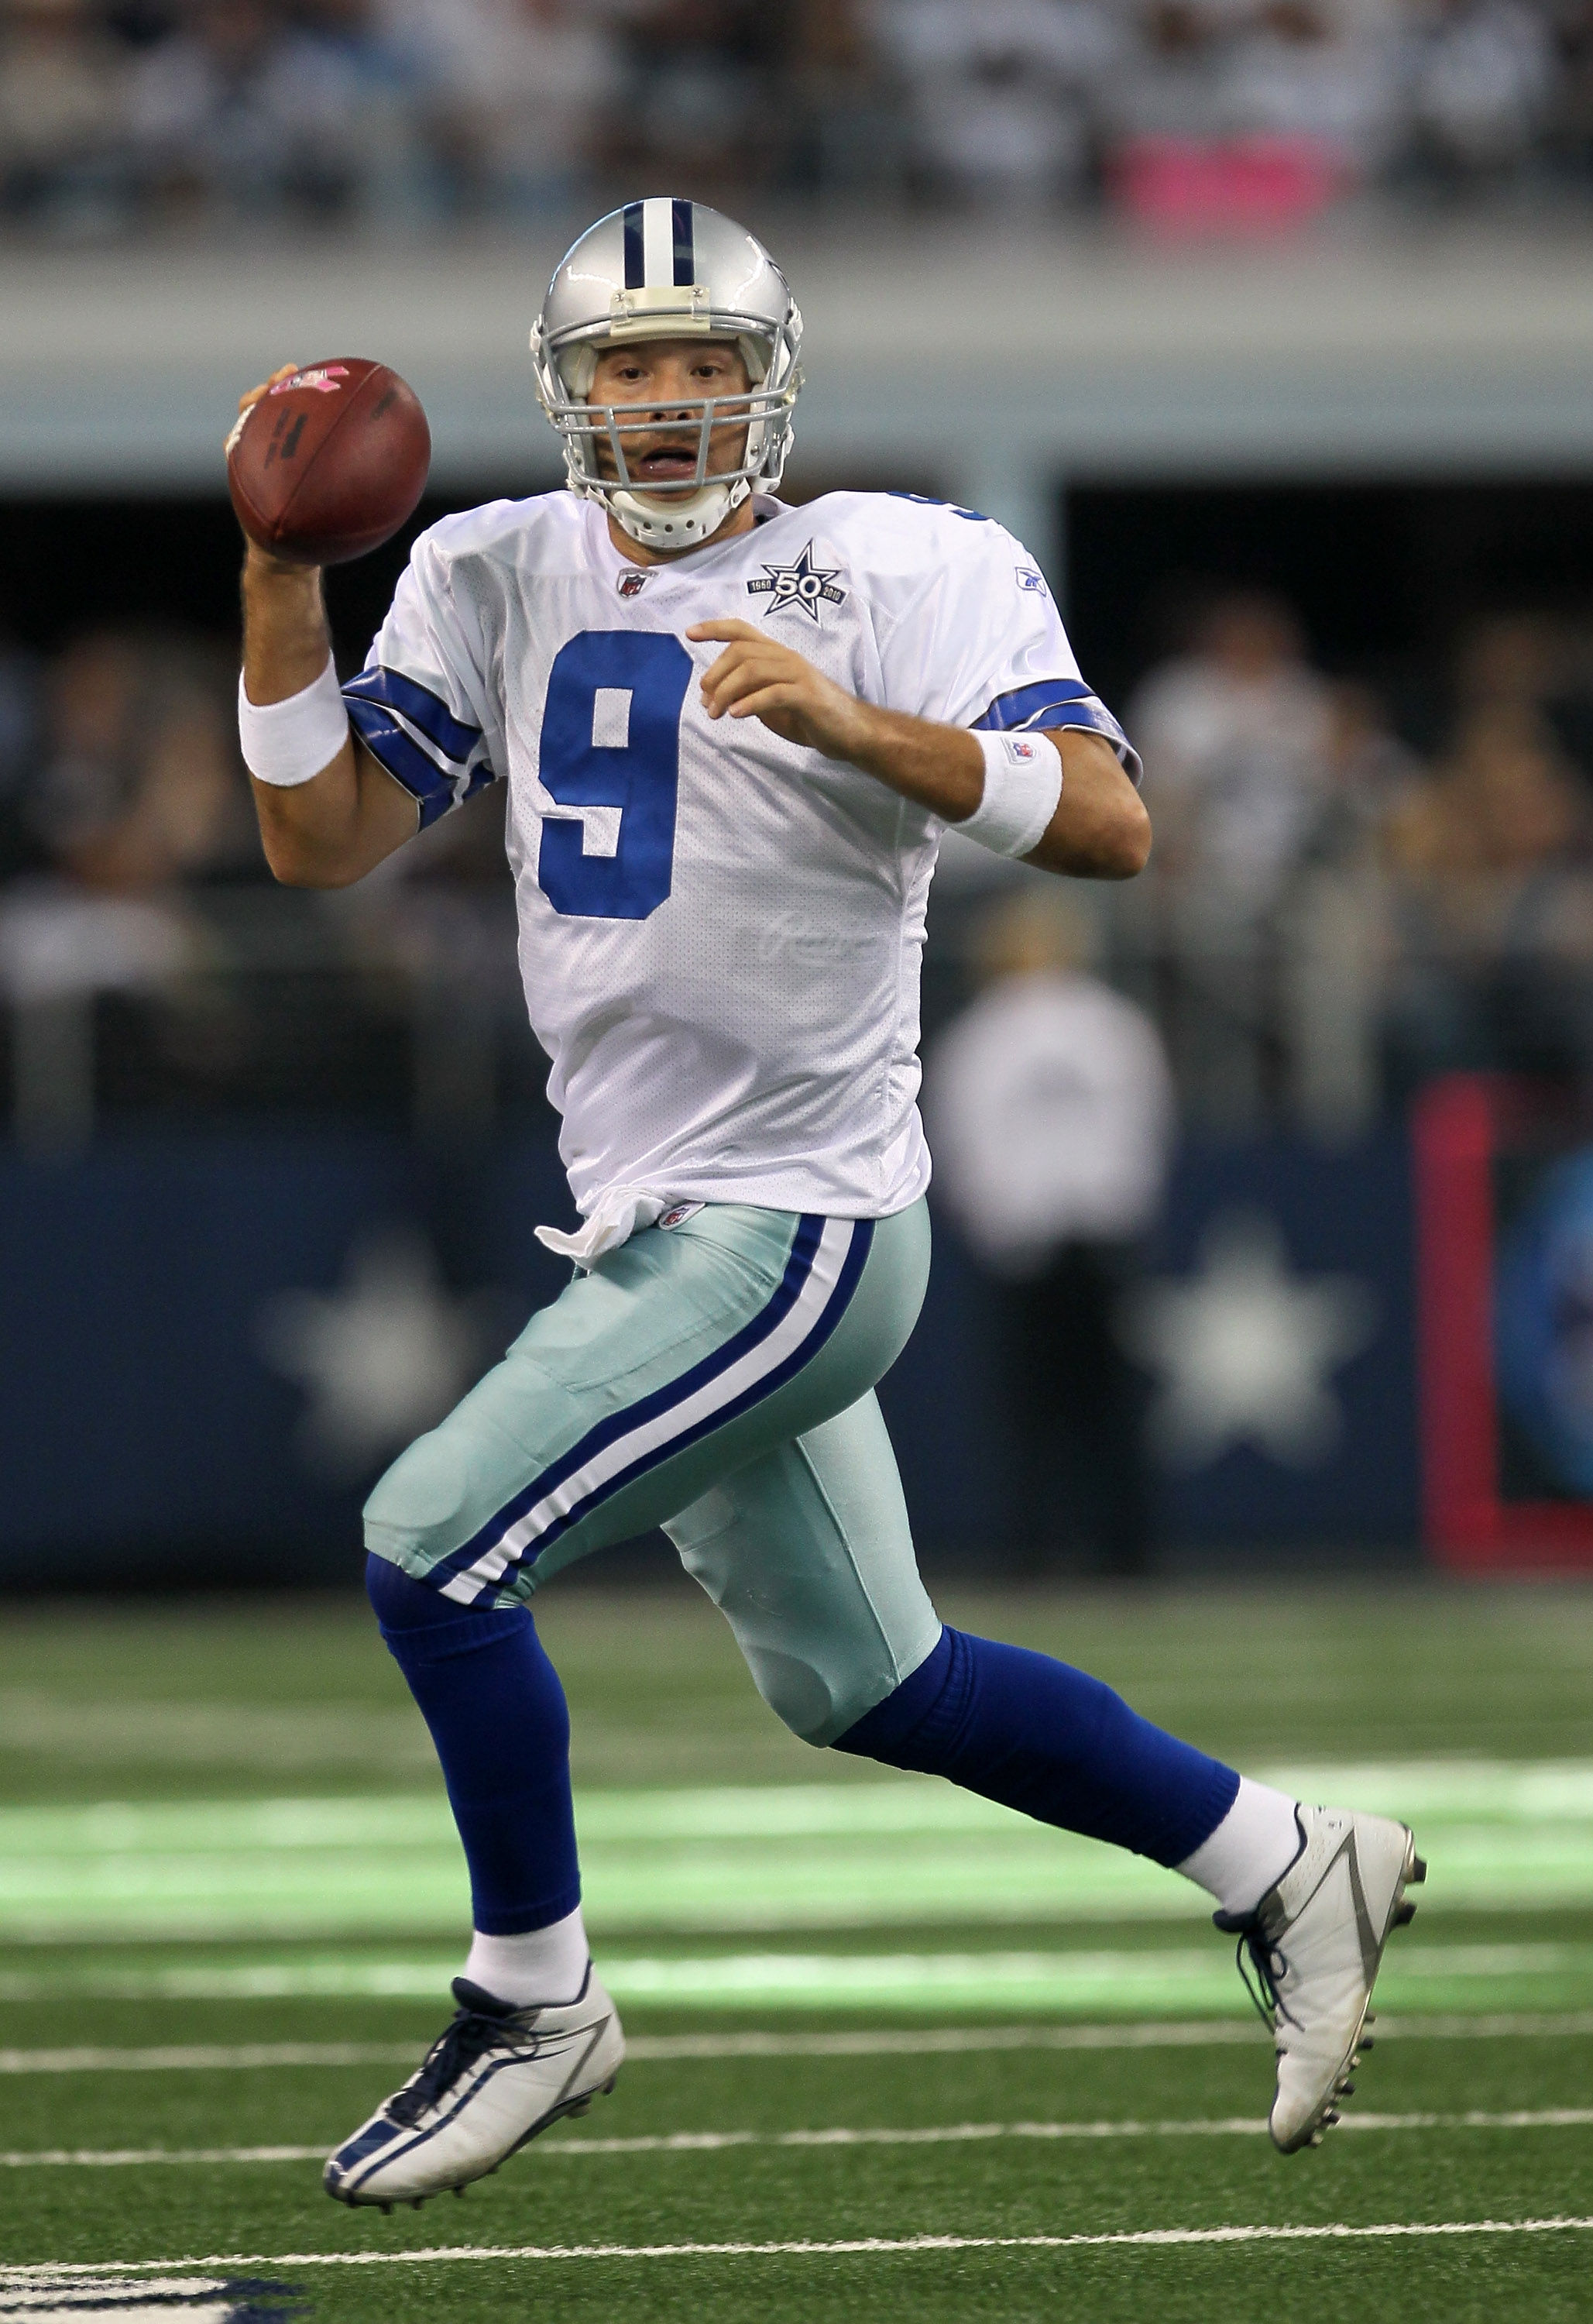 ARLINGTON, TX - OCTOBER 10:  Quarterback Tony Romo #9 of the Dallas Cowboys scrambles with the ball against the Tennessee Titans at Cowboys Stadium on October 10, 2010 in Arlington, Texas. The Titans won 34-27.  (Photo by Stephen Dunn/Getty Images)